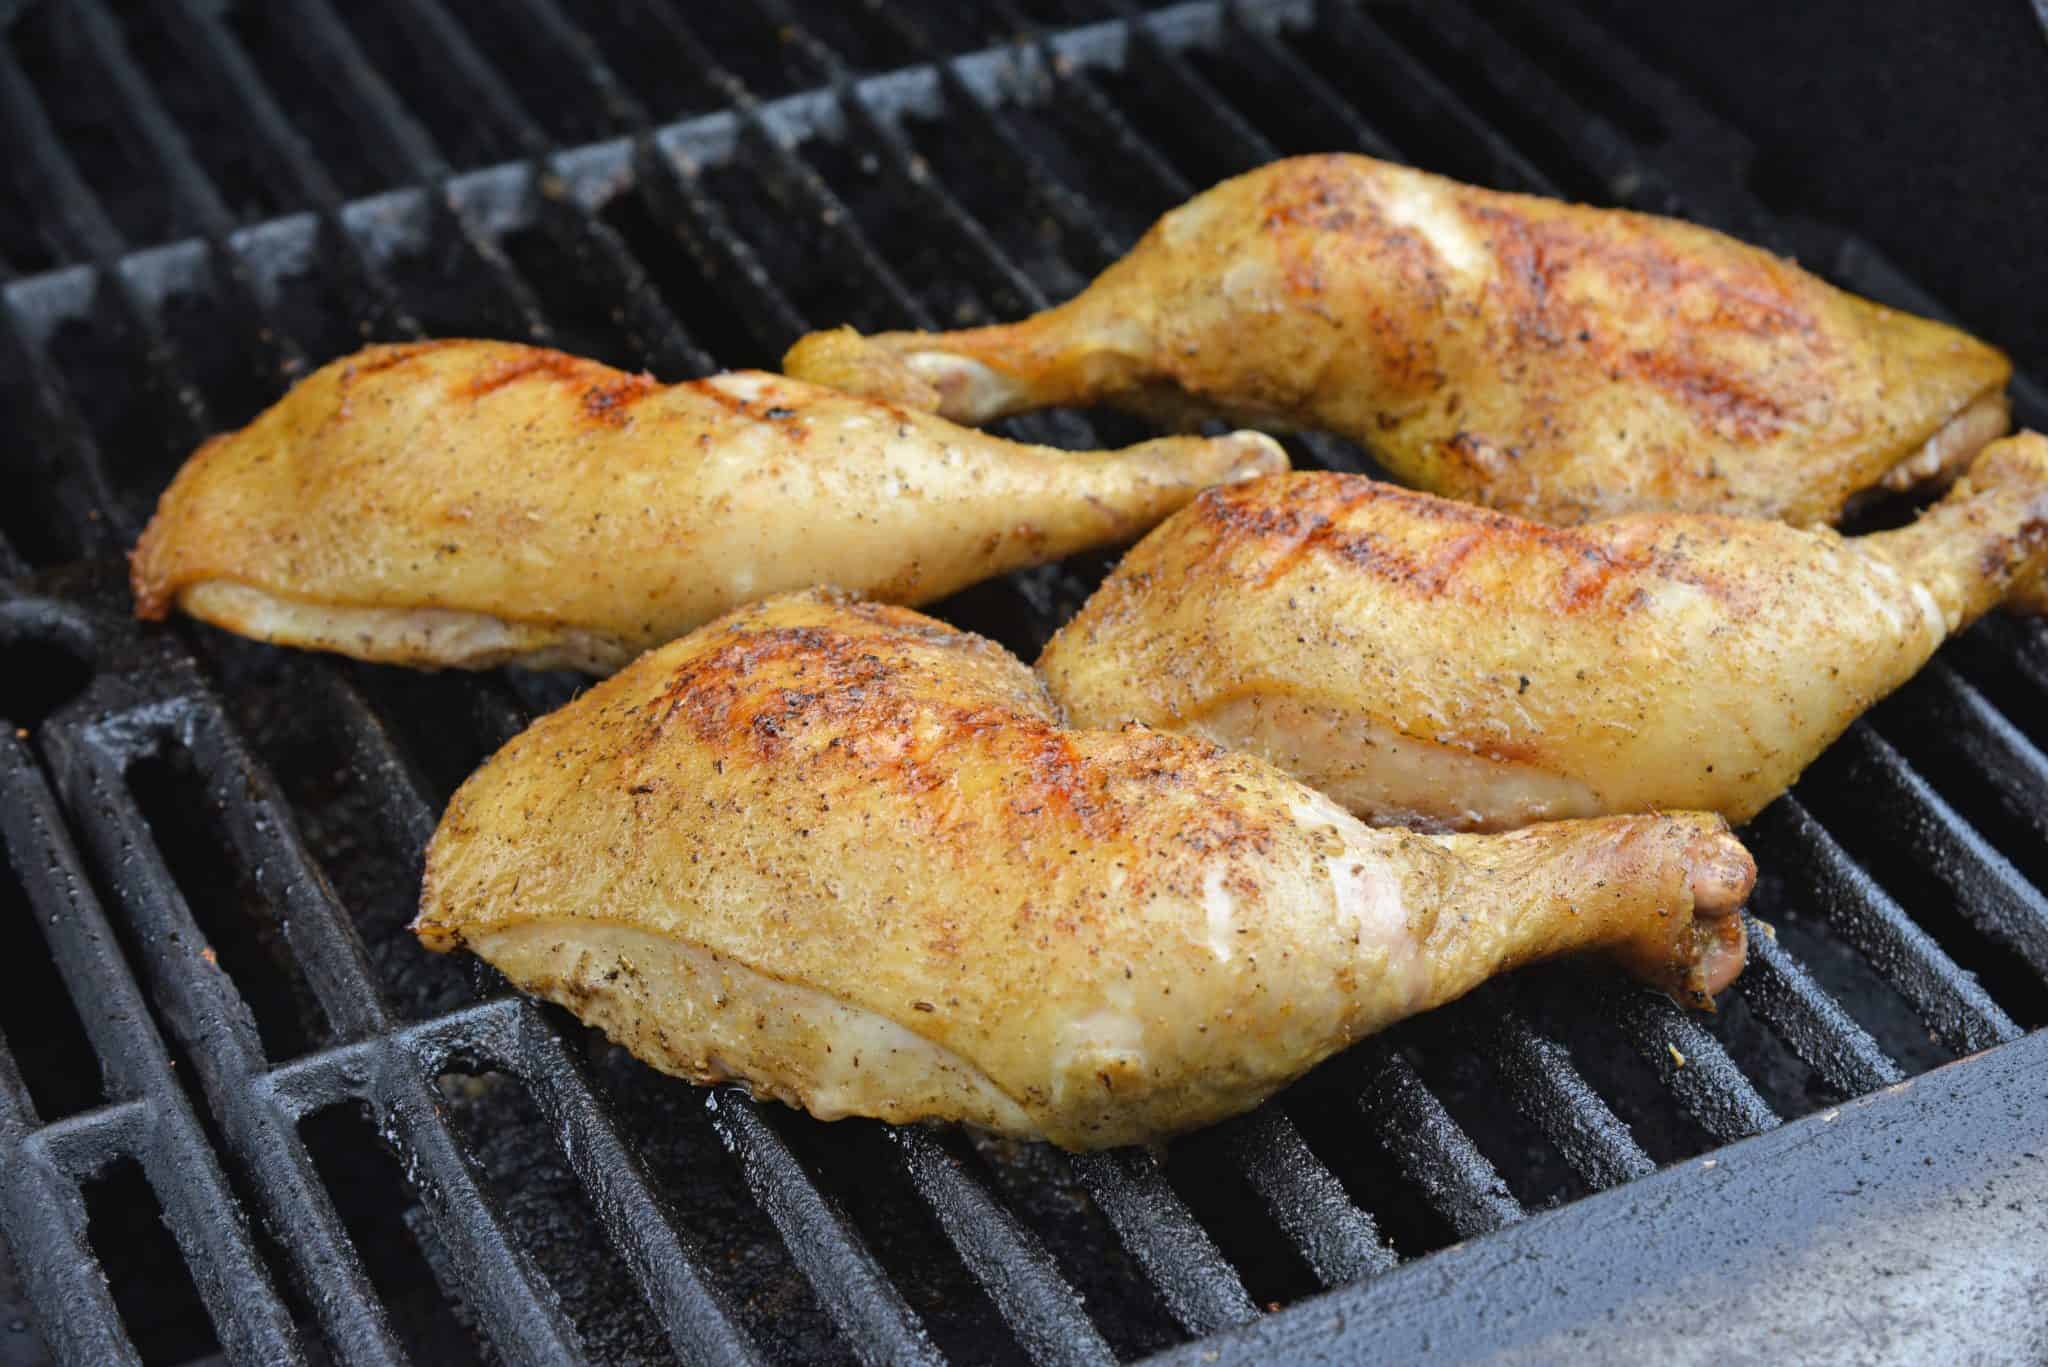 Fireman Chicken, also known as Cornell Chicken BBQ, is a classic BBQ chicken marinade that originated in upstate New York, but is making its way through the states!